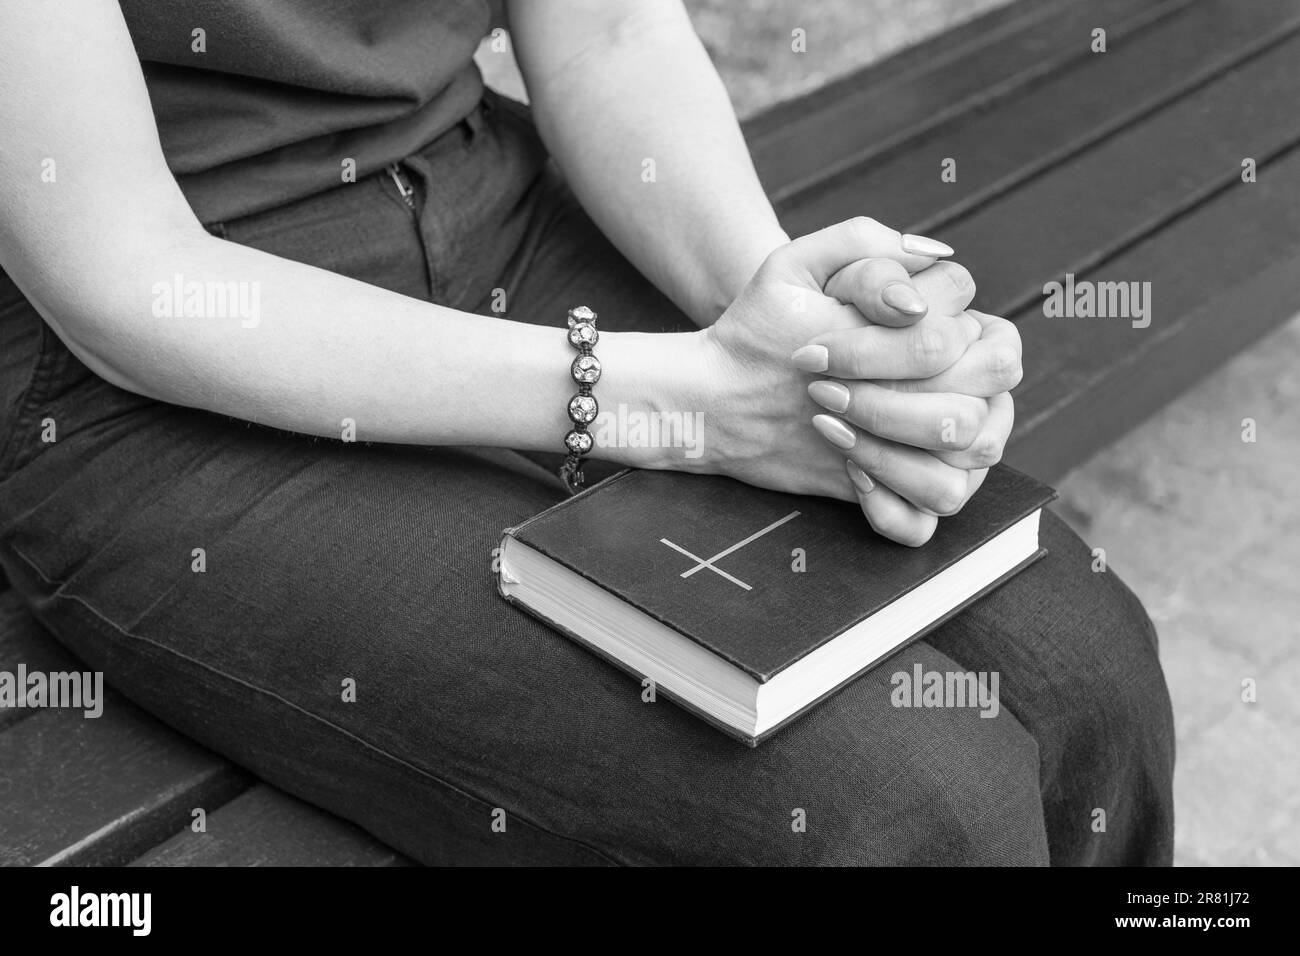 woman asking god holding bible on her lap. woman calls to God for help. woman reciting a prayer Stock Photo